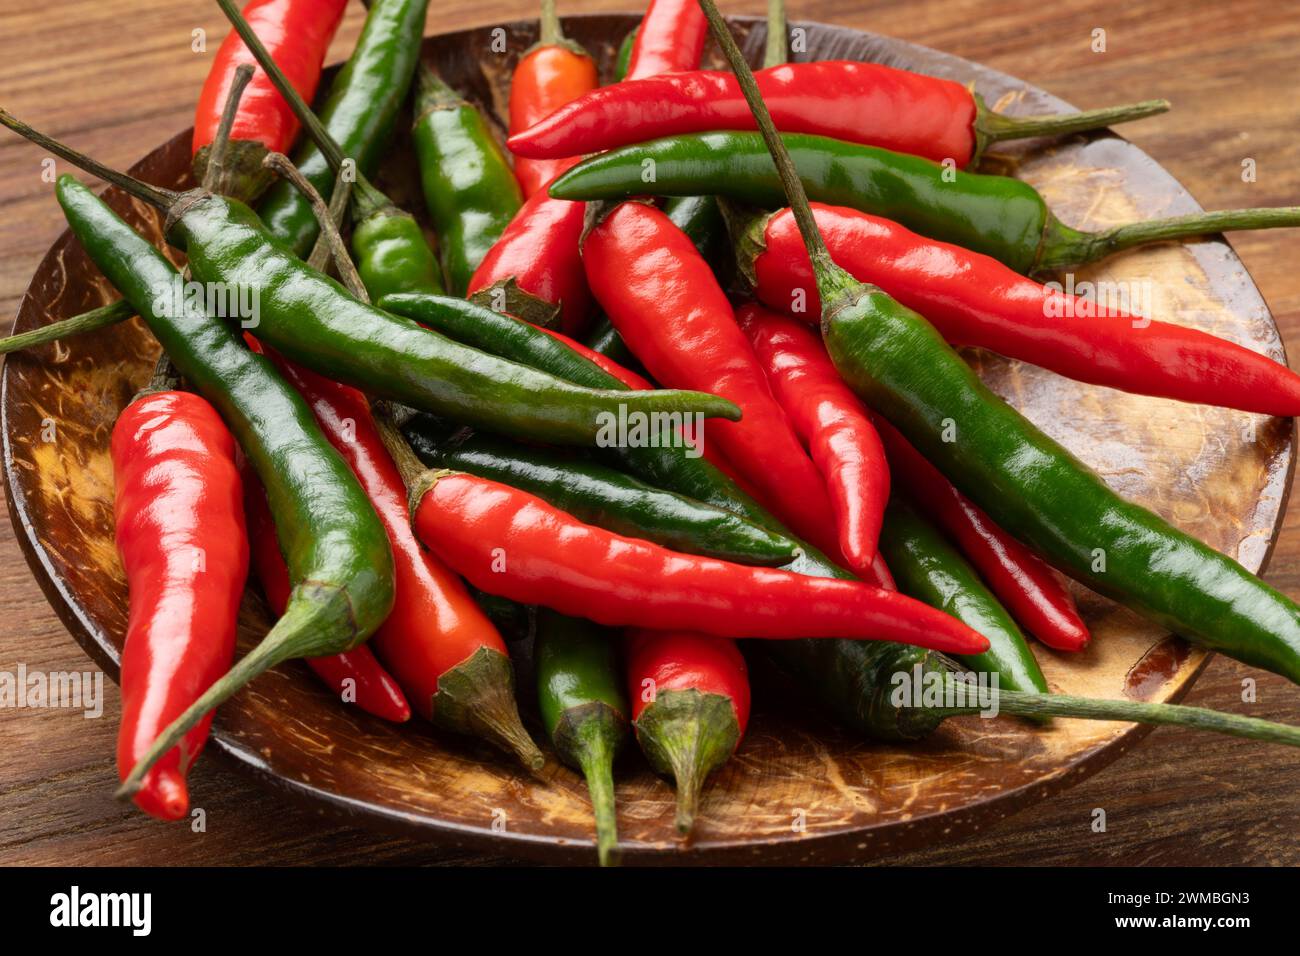 Bowl with whole fresh raw green and red rawit hot peppers close up Stock Photo